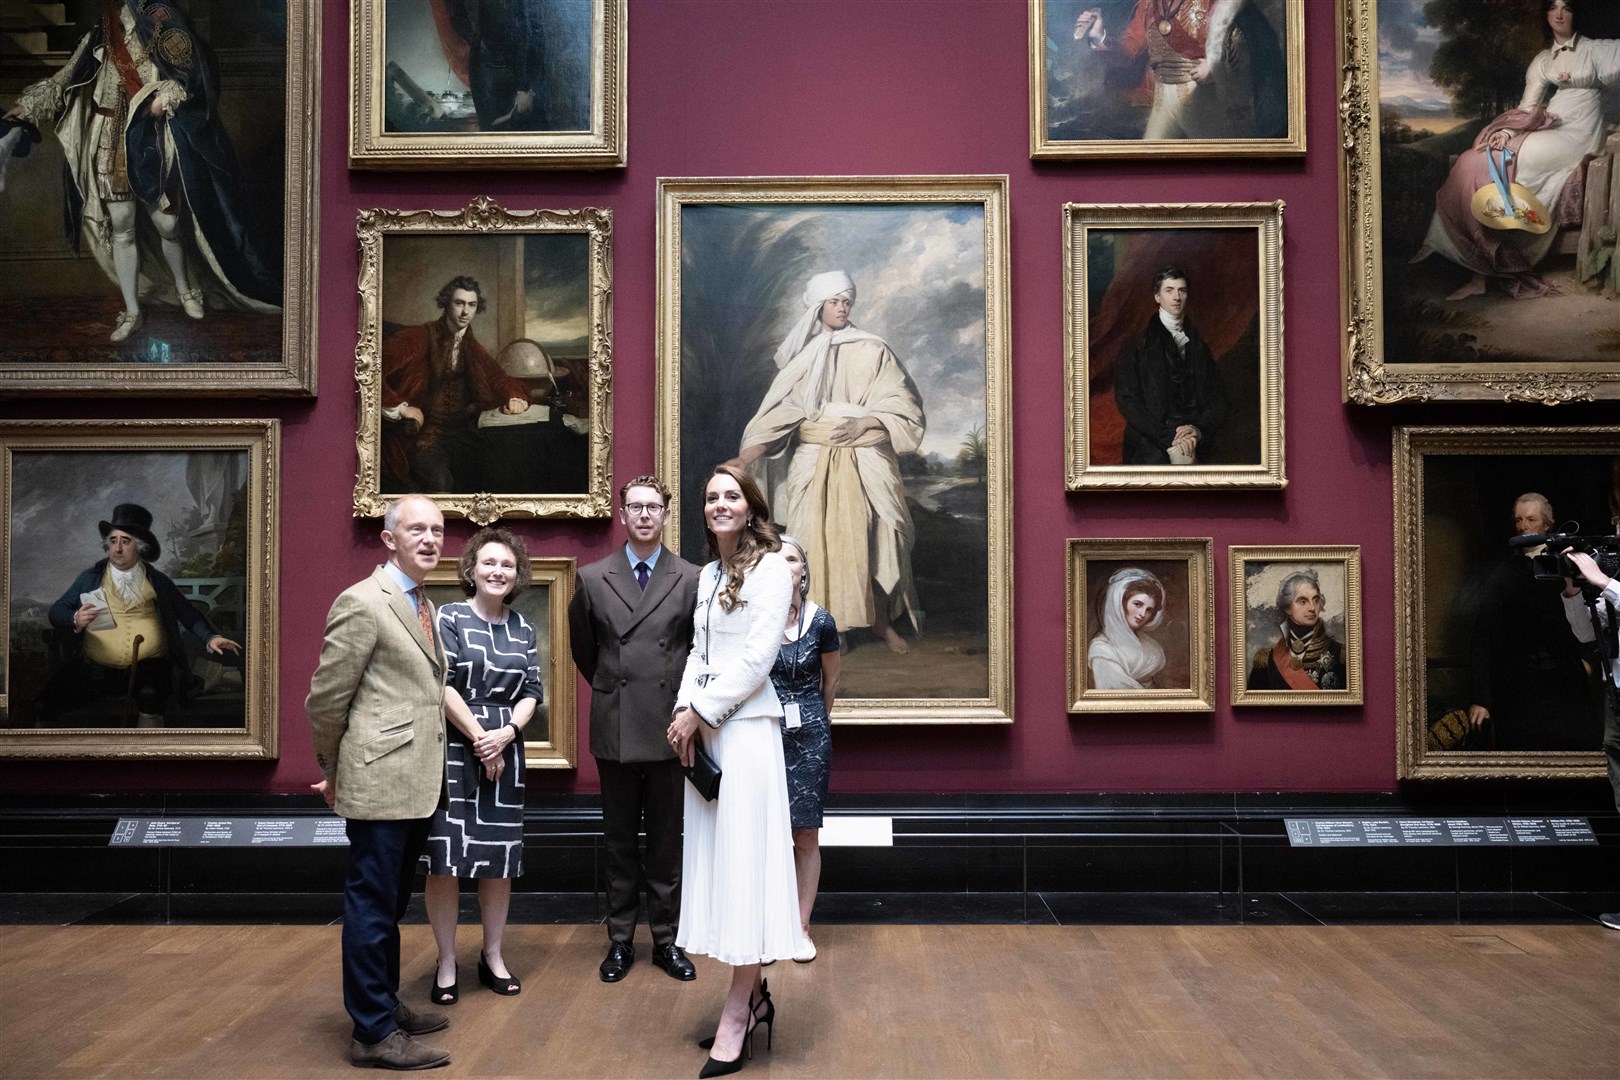 The Princess of Wales stands during a visit to re-open the National Portrait Gallery in London, following a three-year refurbishment programme (Paul Grover/The Telegraph/PA)